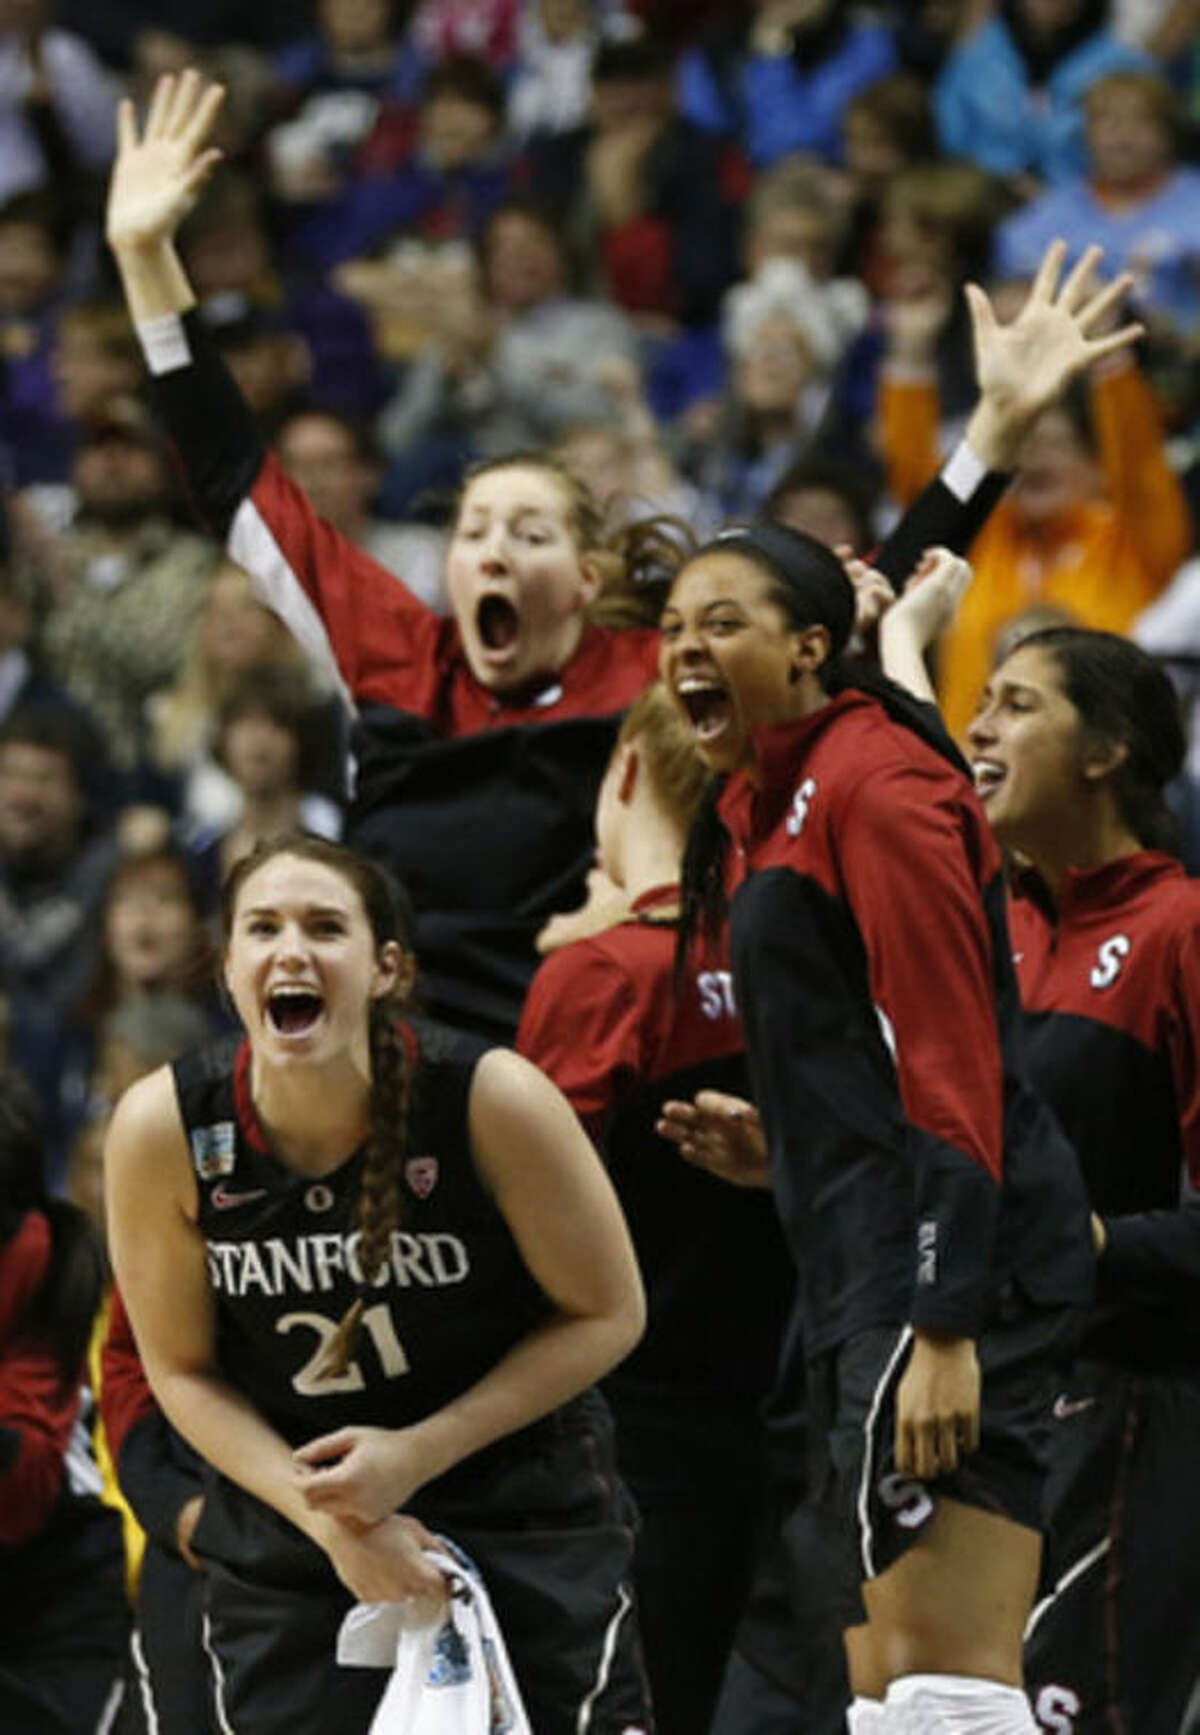 Stanford players celebrate a three-point shot against Connecticut during the first half of the semifinal game in the Final Four of the NCAA women's college basketball tournament, Sunday, April 6, 2014, in Nashville, Tenn. (AP Photo/John Bazemore)